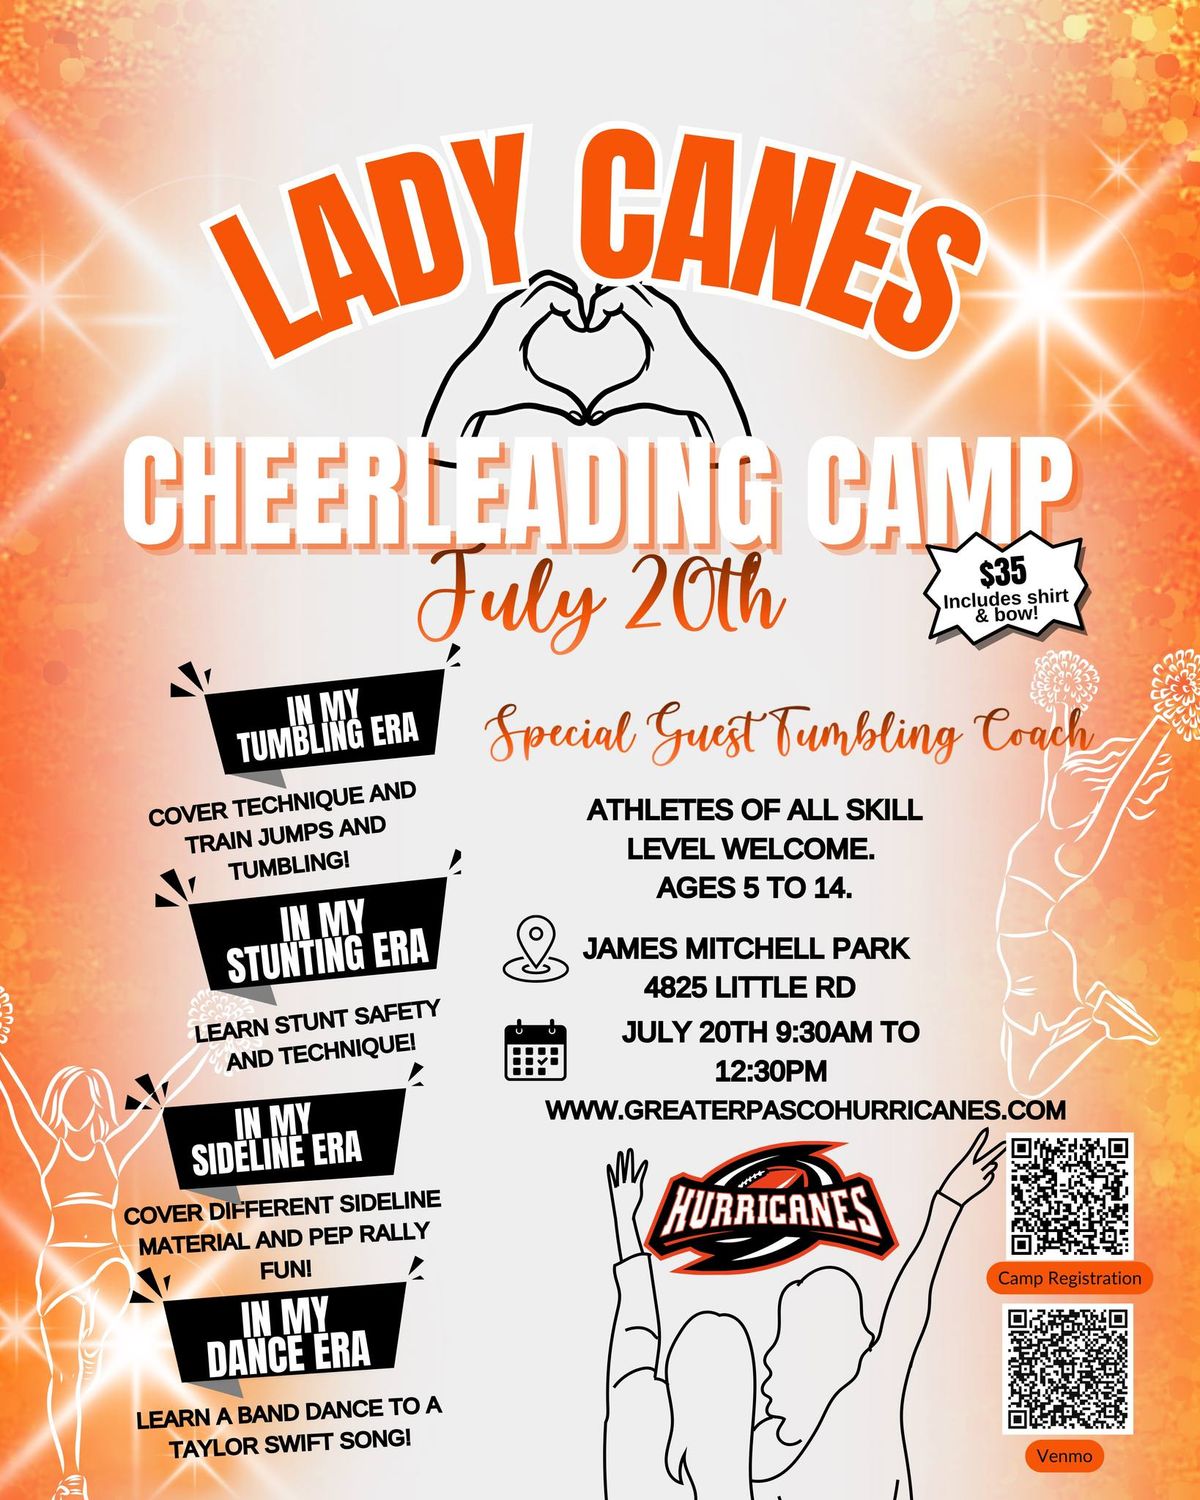 LADY CANES CHEER CAMP